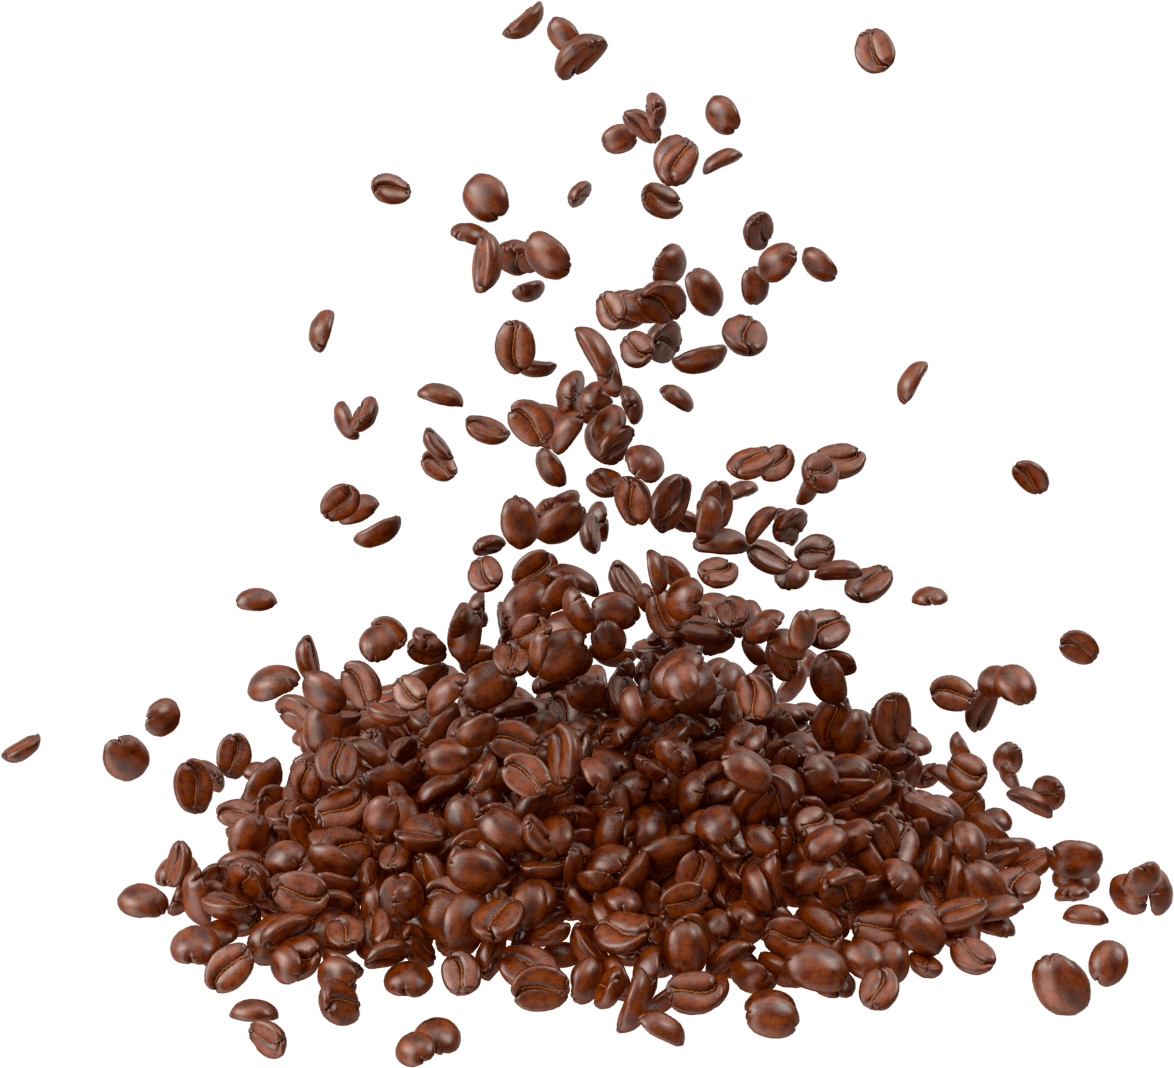 Free Coffee Beans Transparent, Download Free Coffee Beans Transparent ...